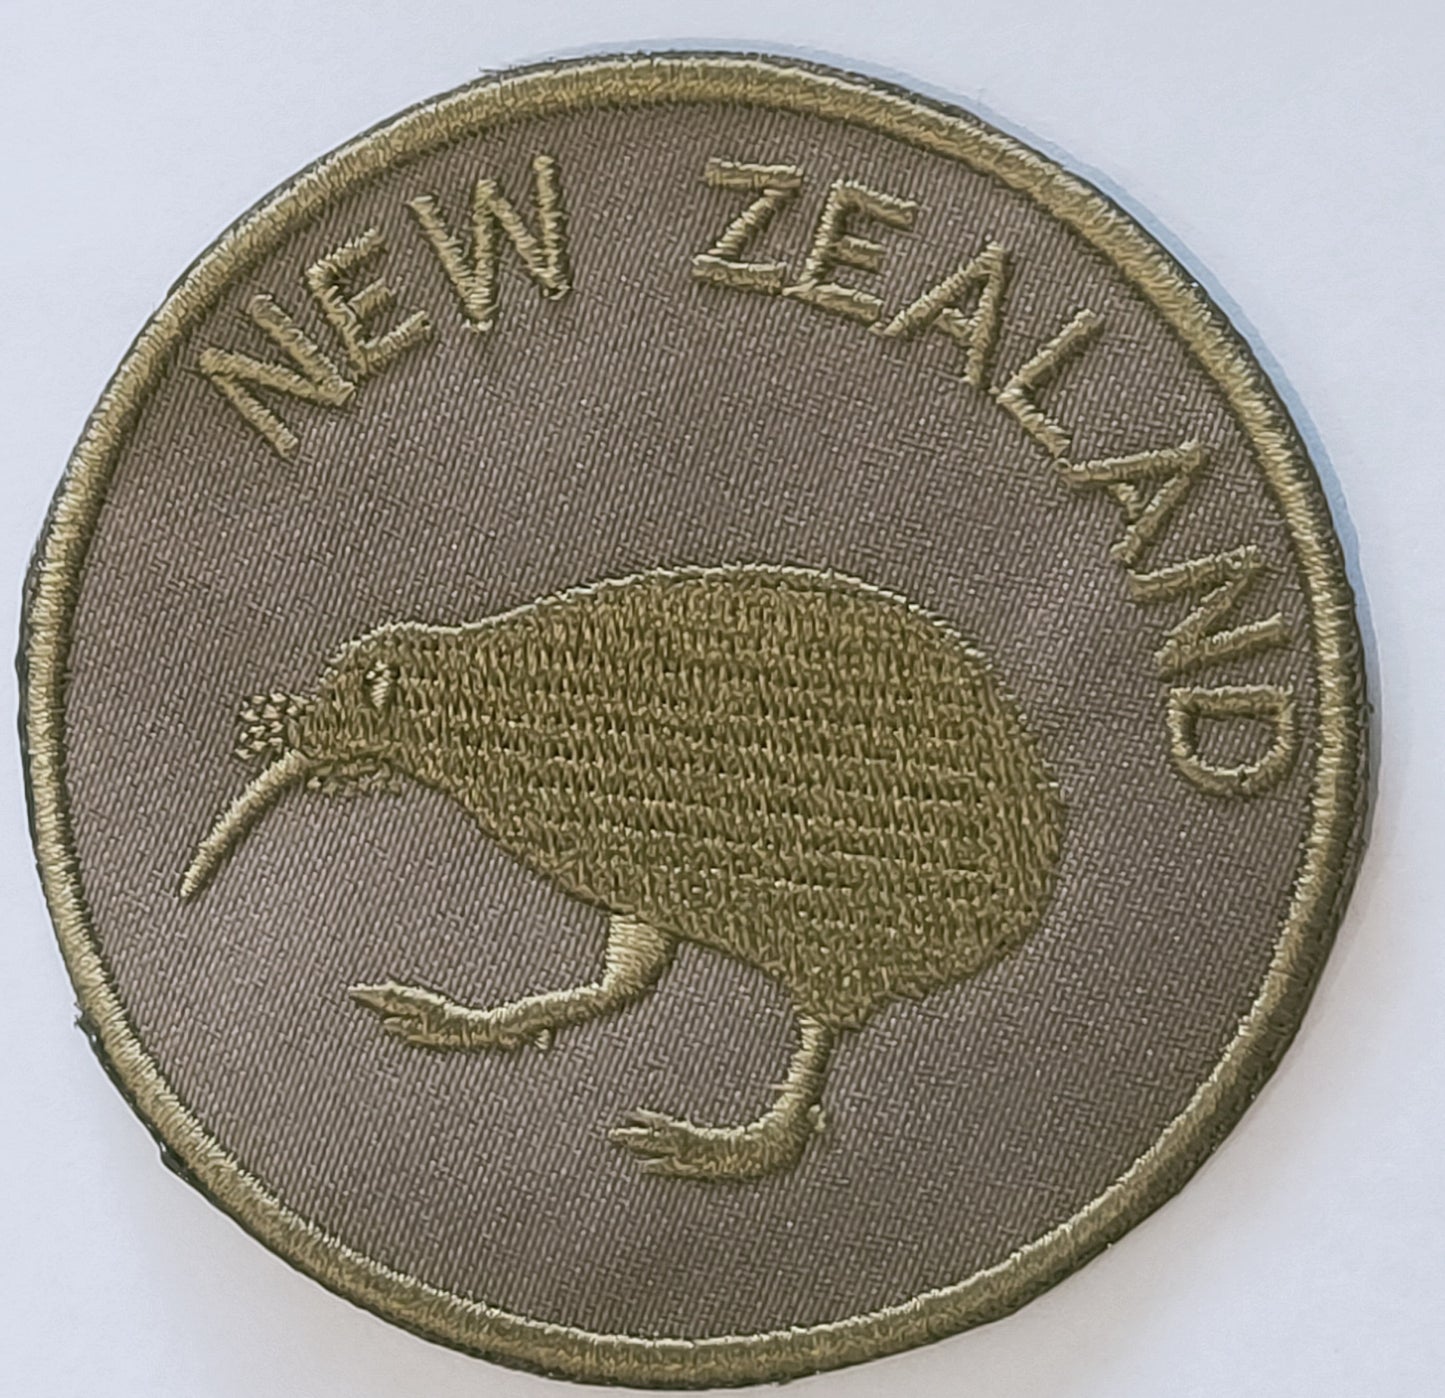 Kiwi Flag Patch with script - Round - Embroidered Multiple colours/sizes